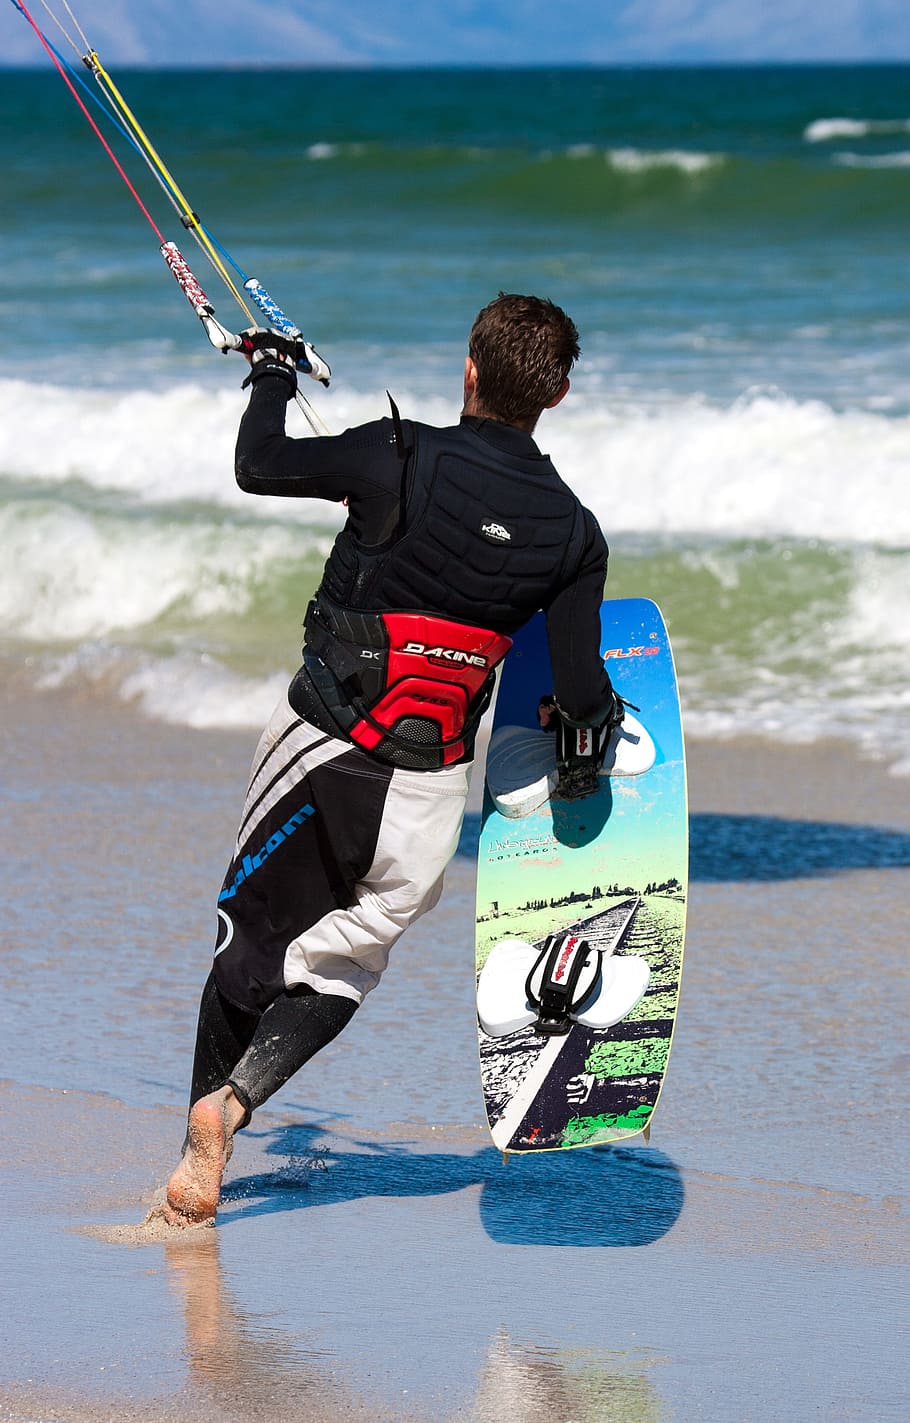 kite boarder, kite boarding, kite surfing, kite-surfing, action